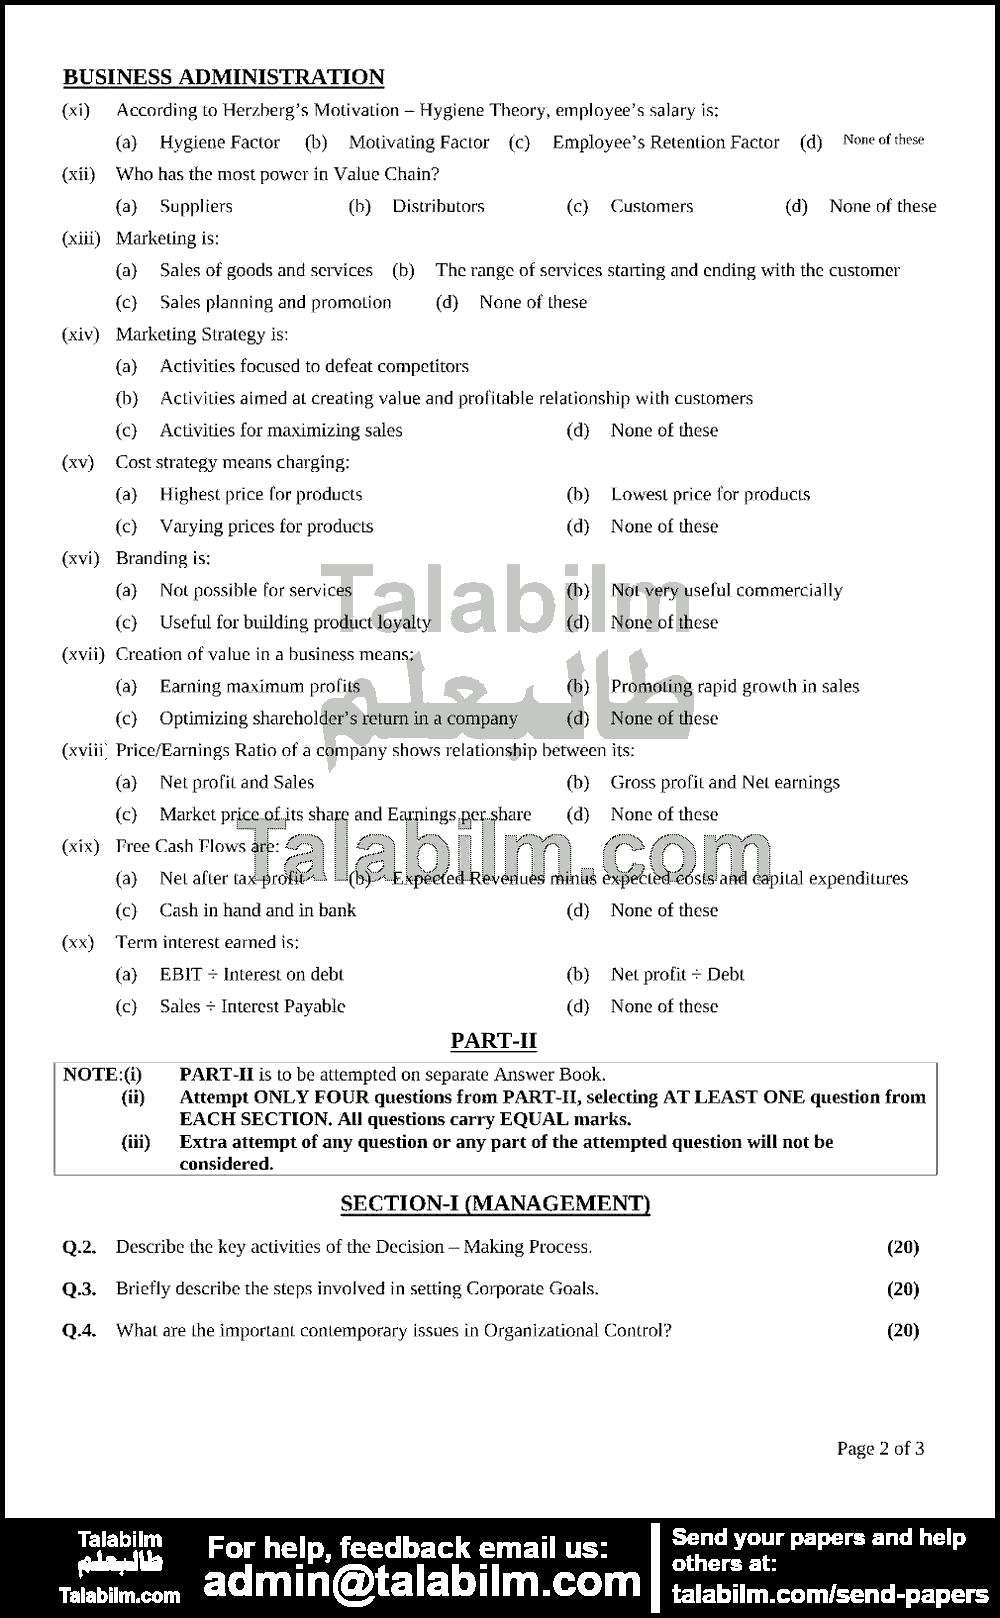 Business Administration 0 past paper for 2011 Page No. 2